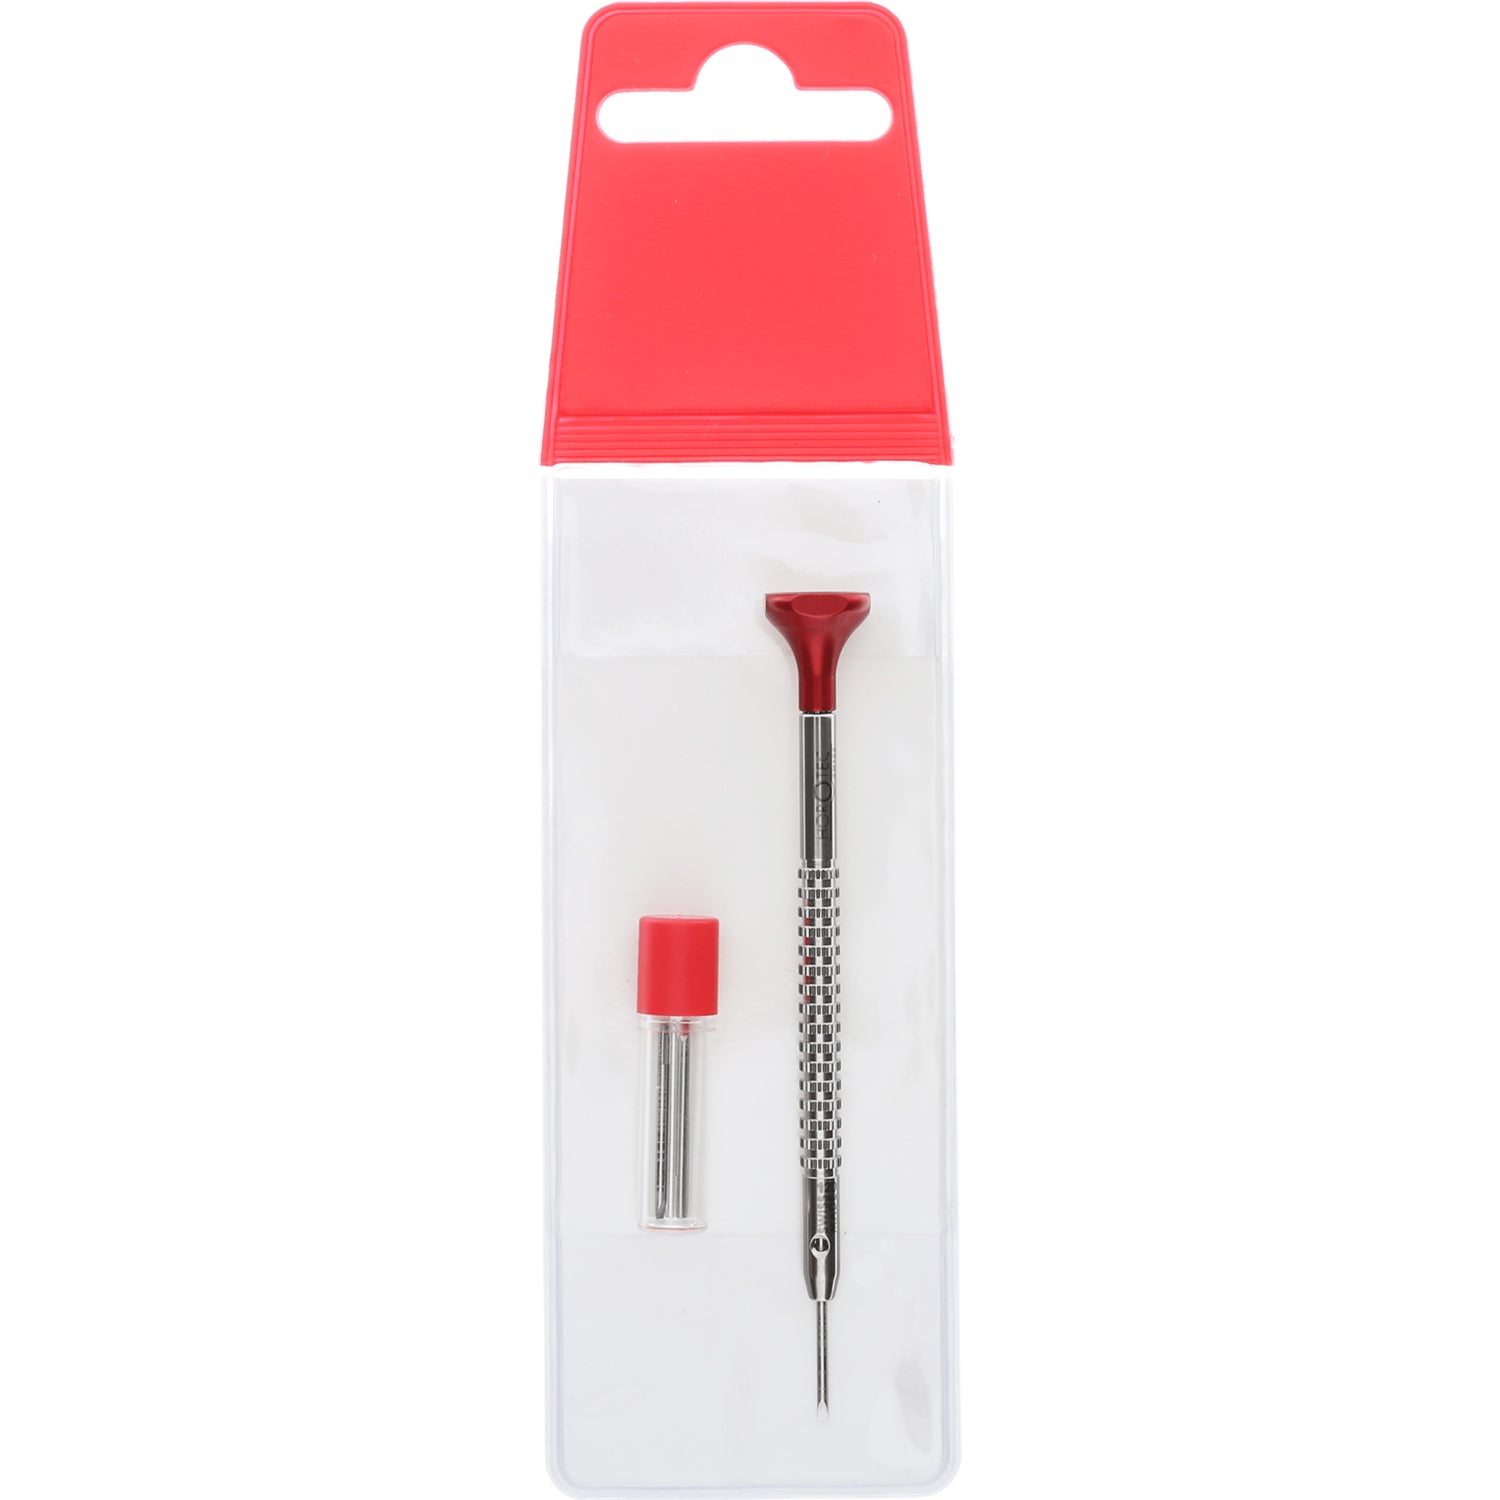 Horotec MSA01.219 Individual Ball Bearing Stainless Steel Screwdriver with 3 Blades